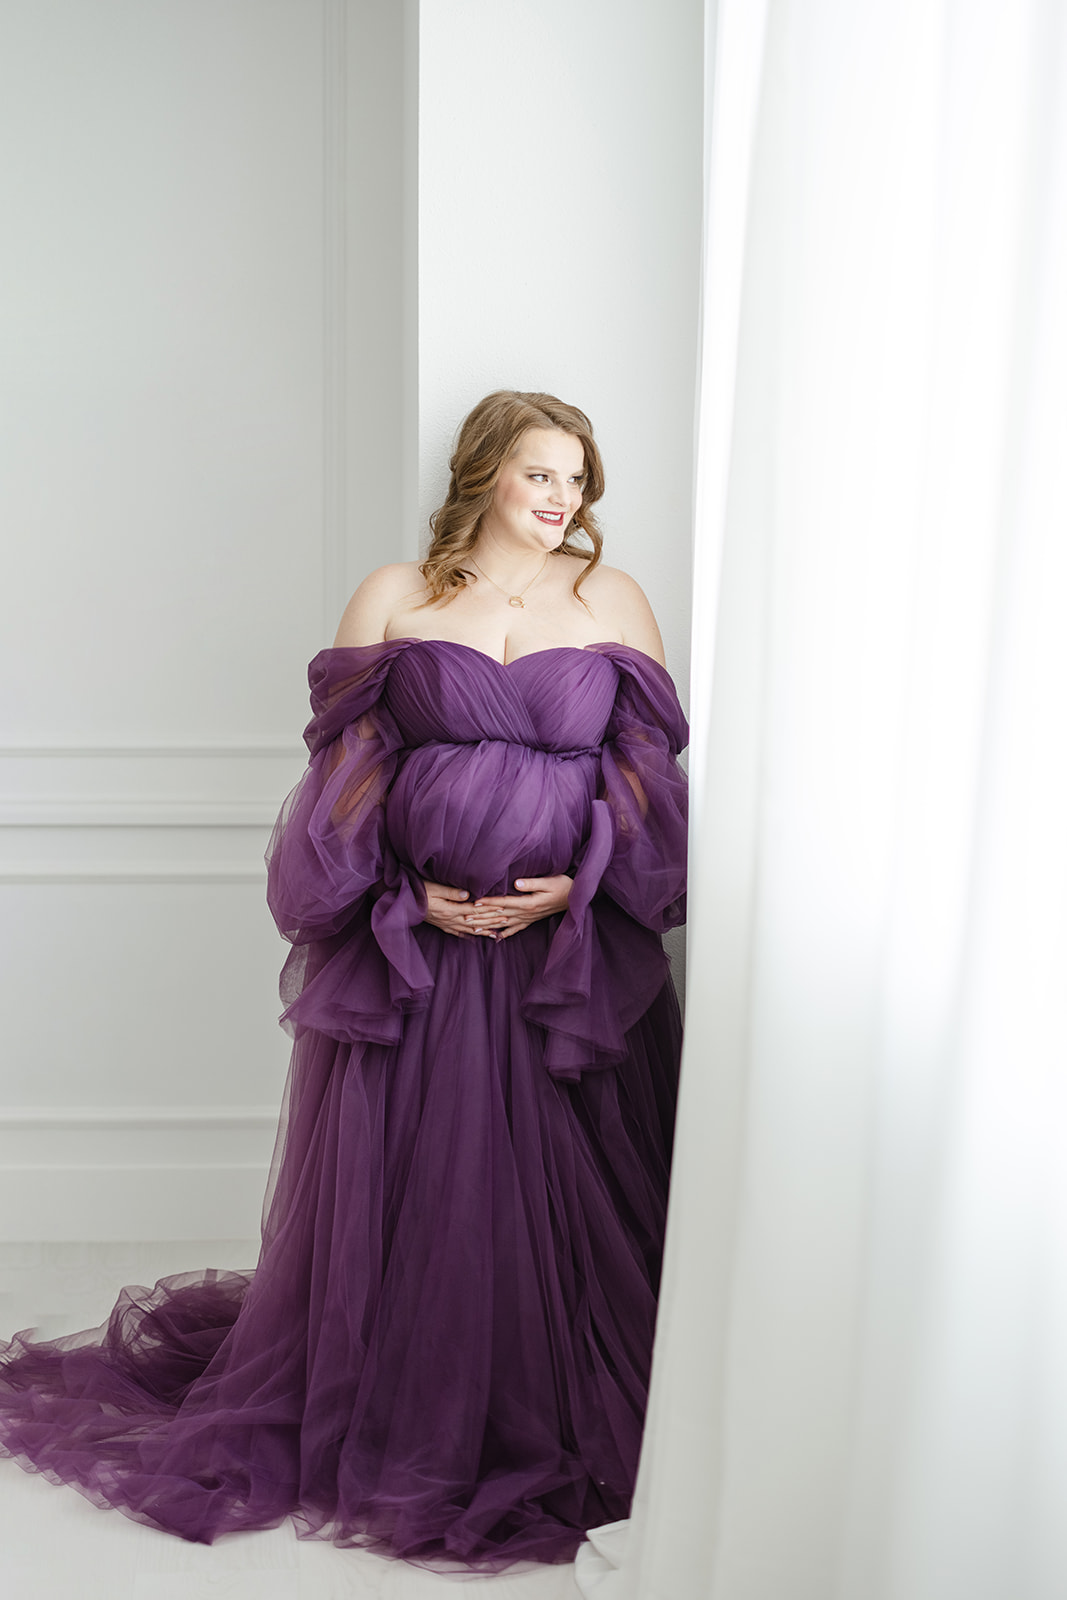 A mom to be leans against a wall smiling out a window while holding her bump in a long tule maternity gown